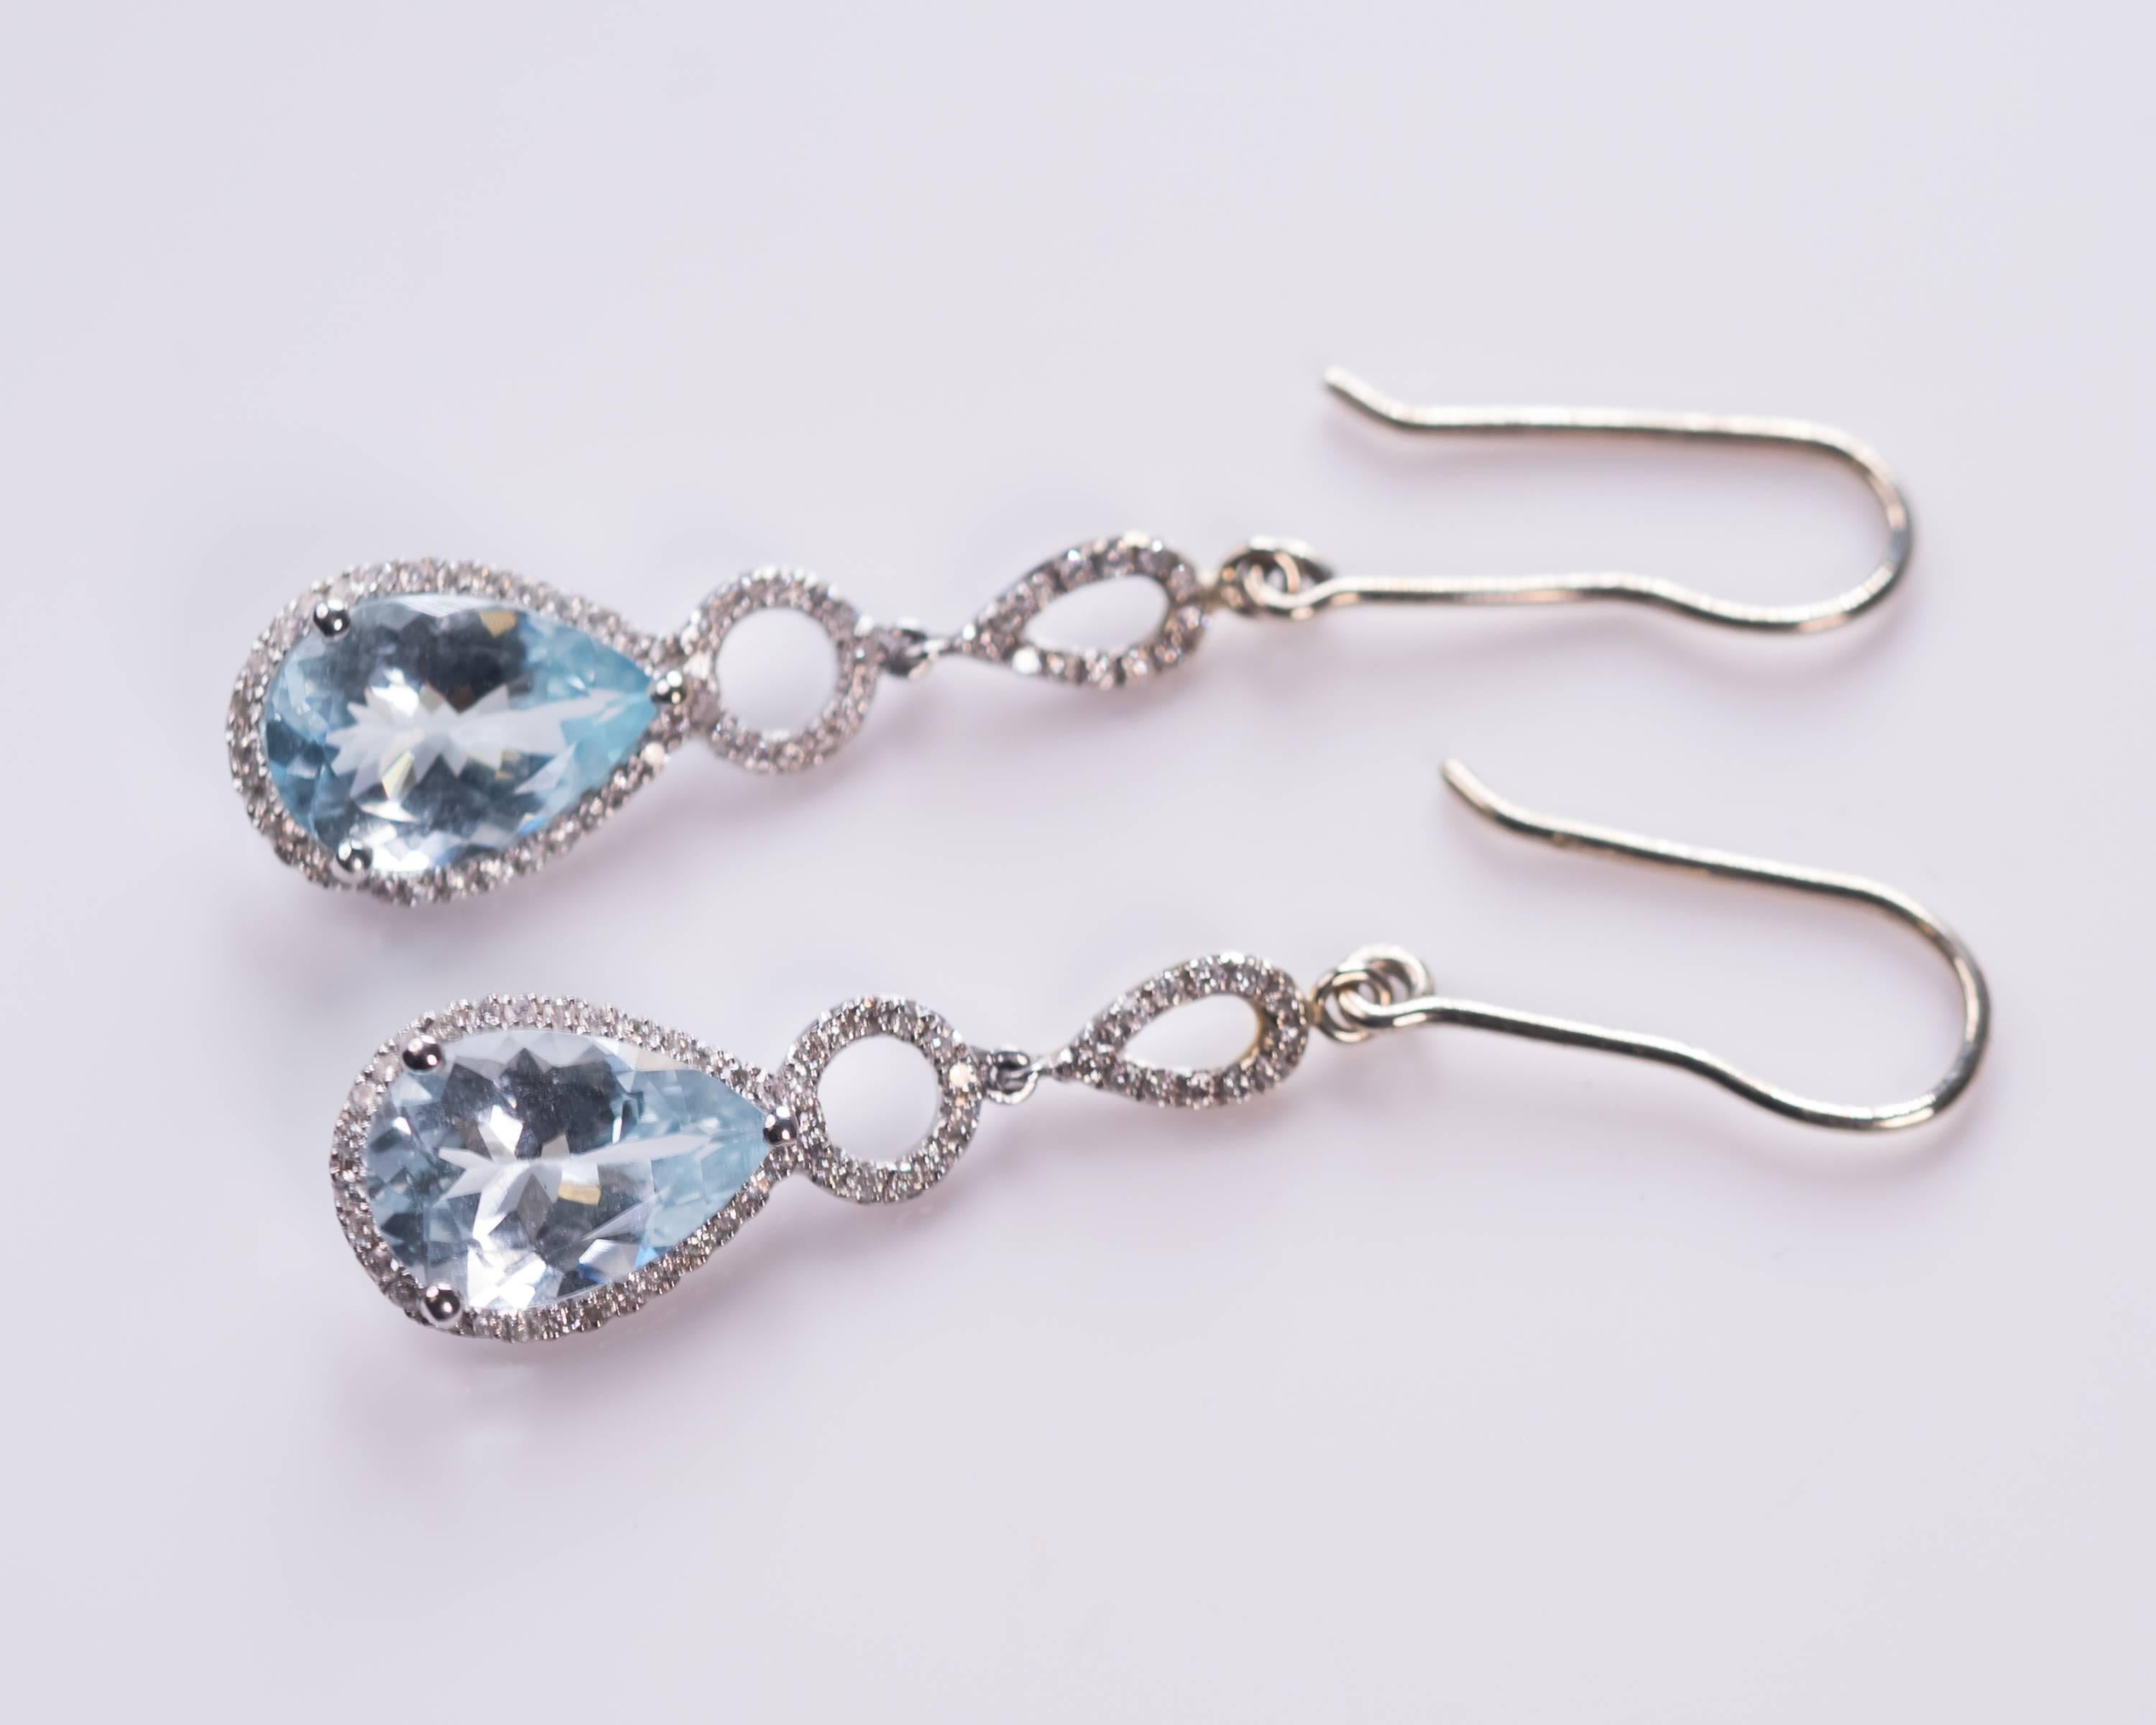 18 Karat White Gold, Blue Topaz and Diamond Drop Earrings - made in house! 

Features 5.0 carats total weight Blue Topaz, .40 carats total weight of Round Brilliant Diamonds and 18 Karat White Gold. Each Pear shaped Light Blue Topaz is surrounded by